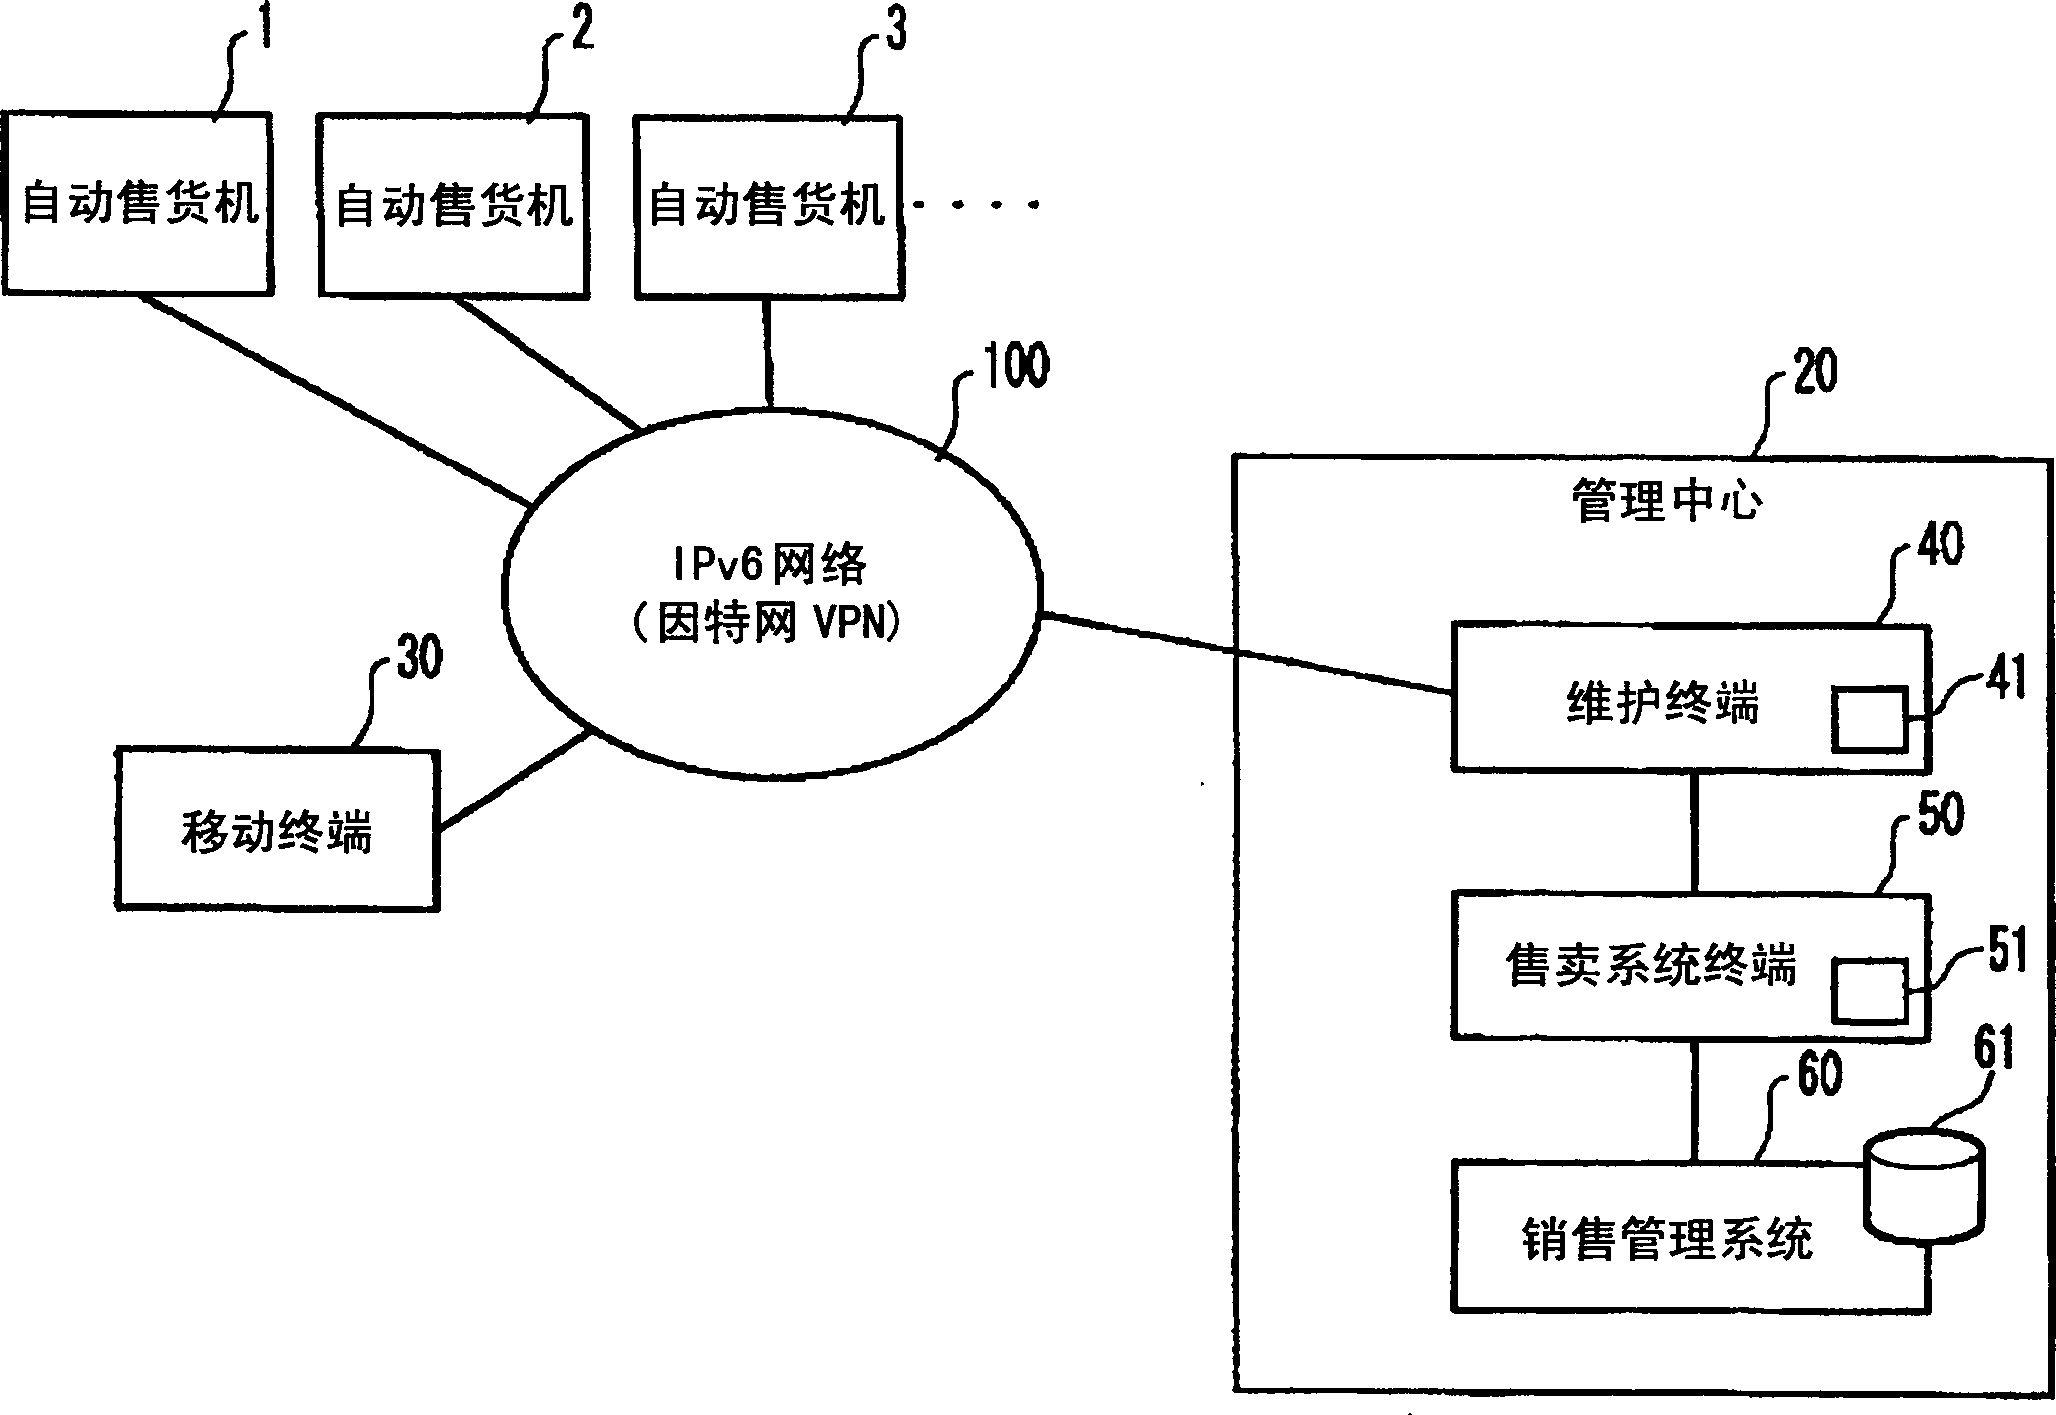 Vending machine management system and method of managing vending machines